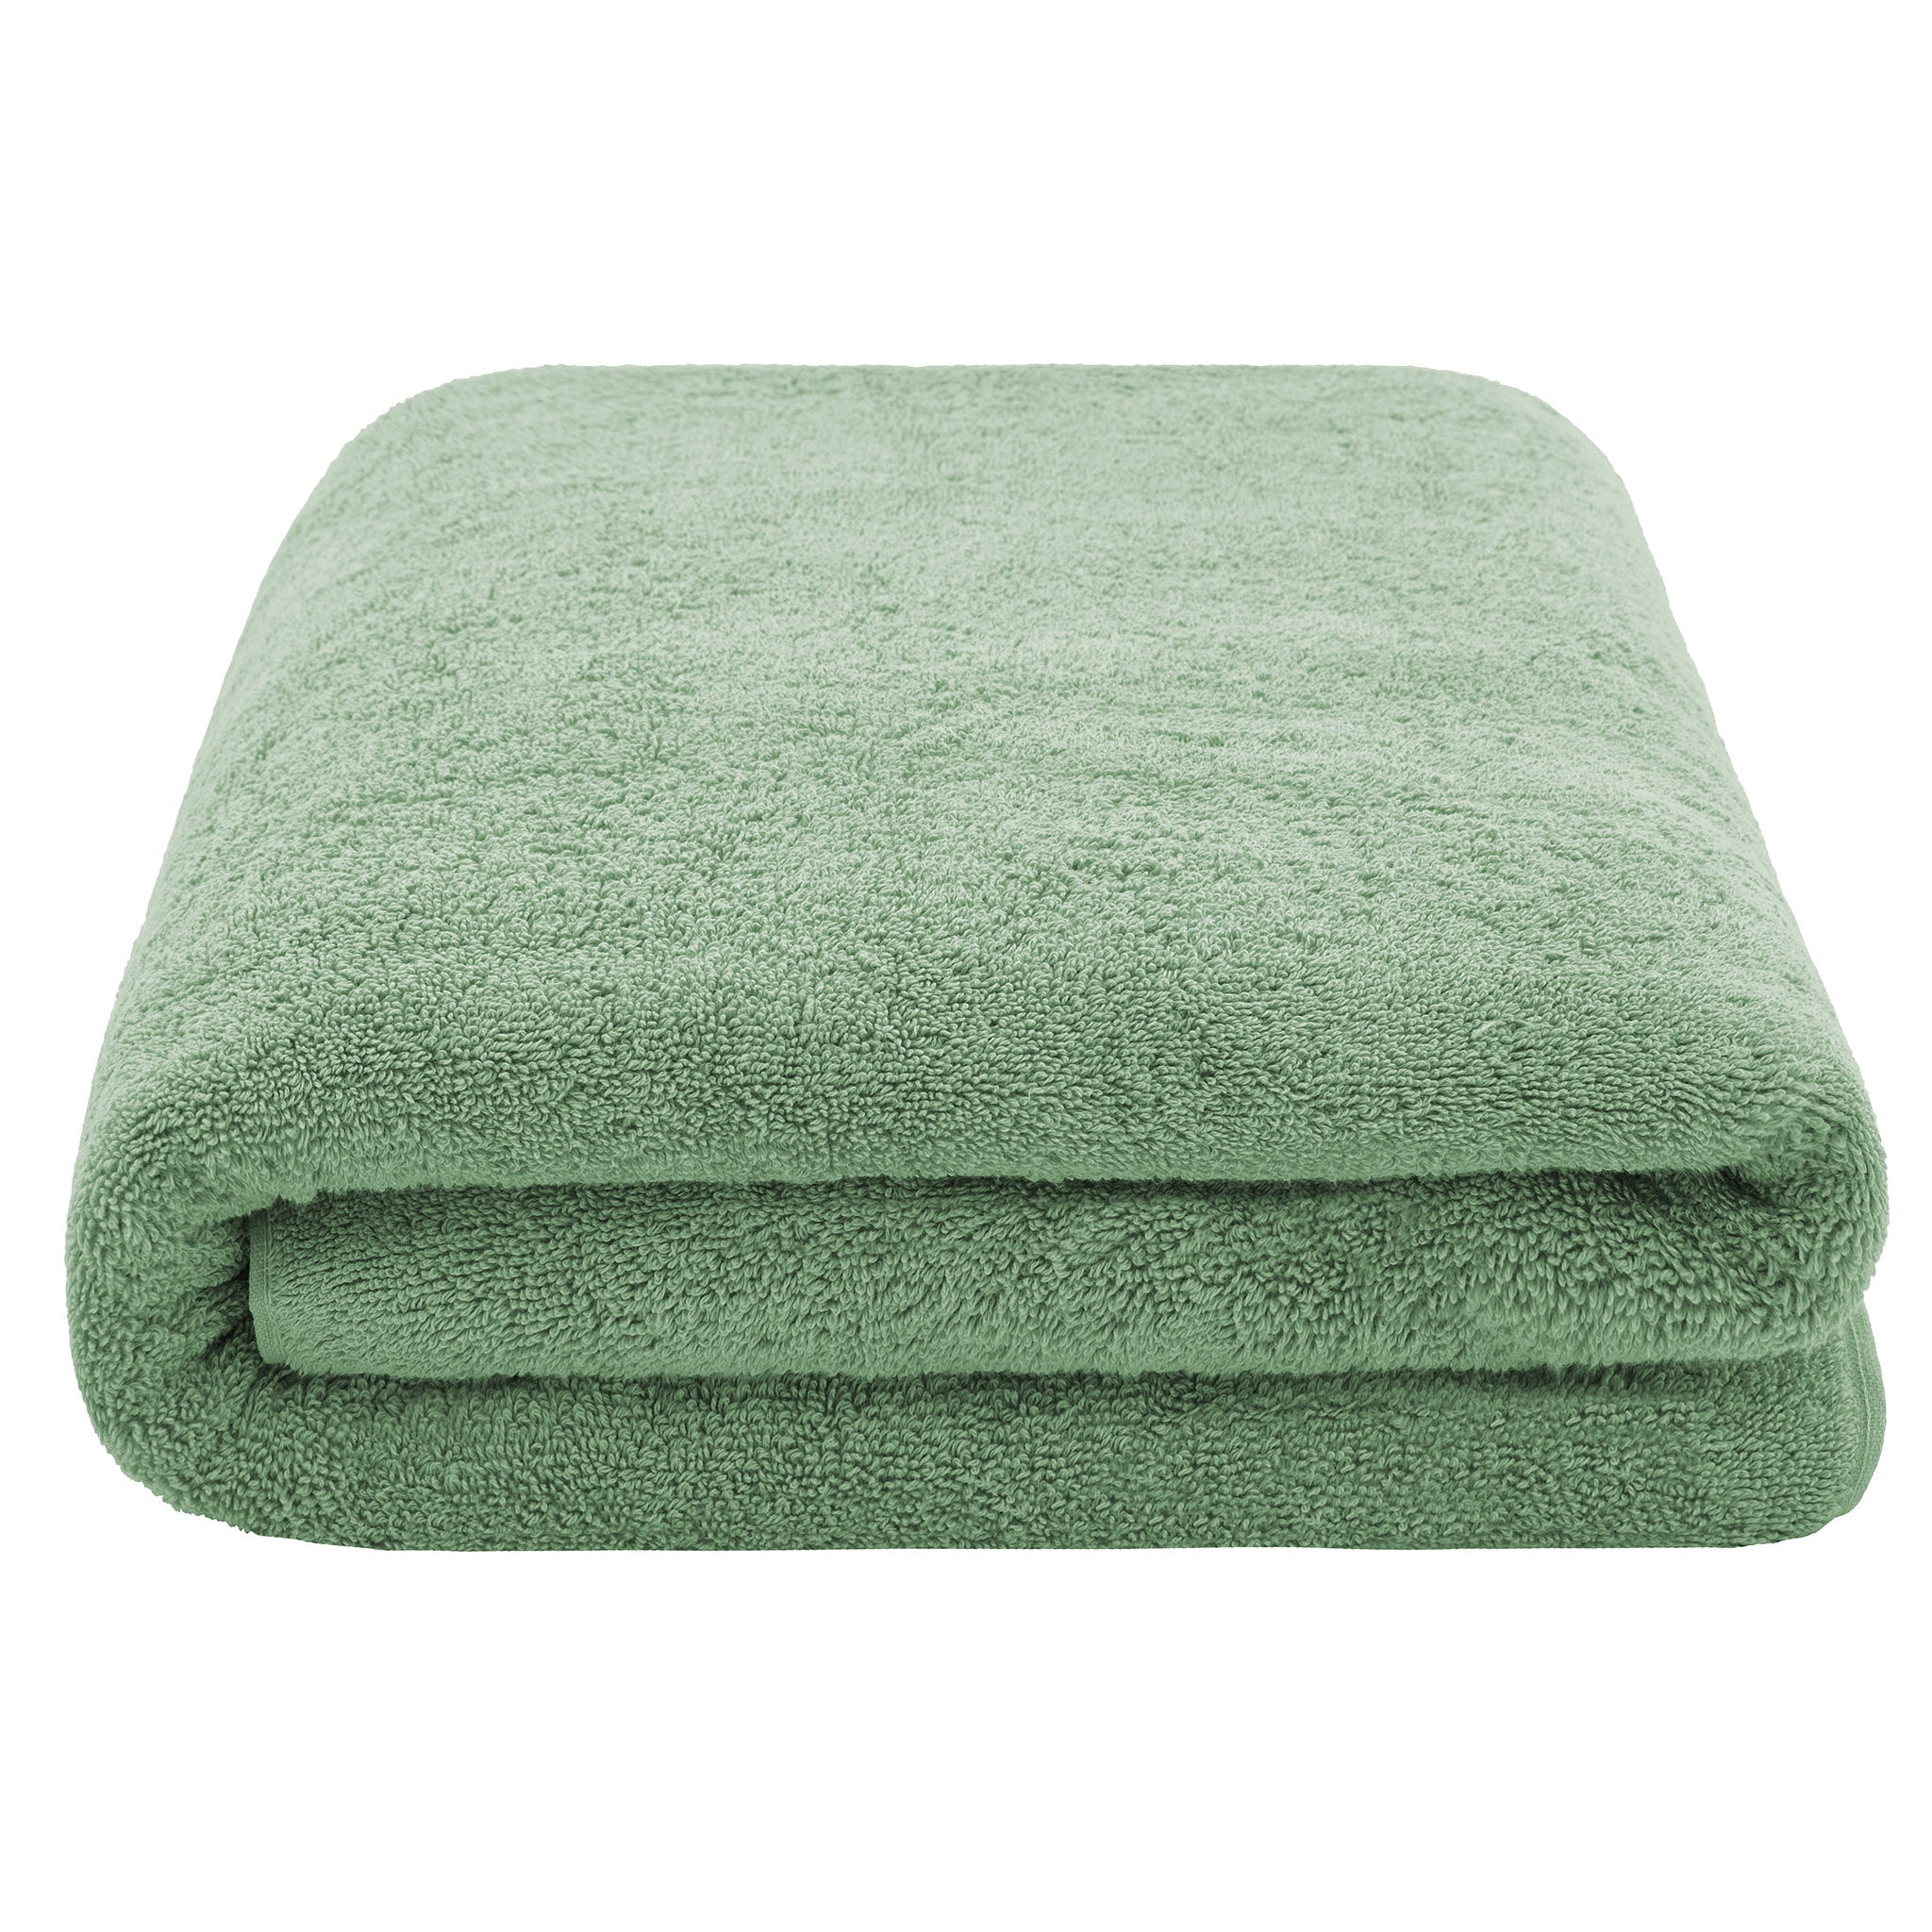 American Soft Linen 100% Ring Spun Cotton 40x80 Inches Oversized Bath Sheets sage-green-3